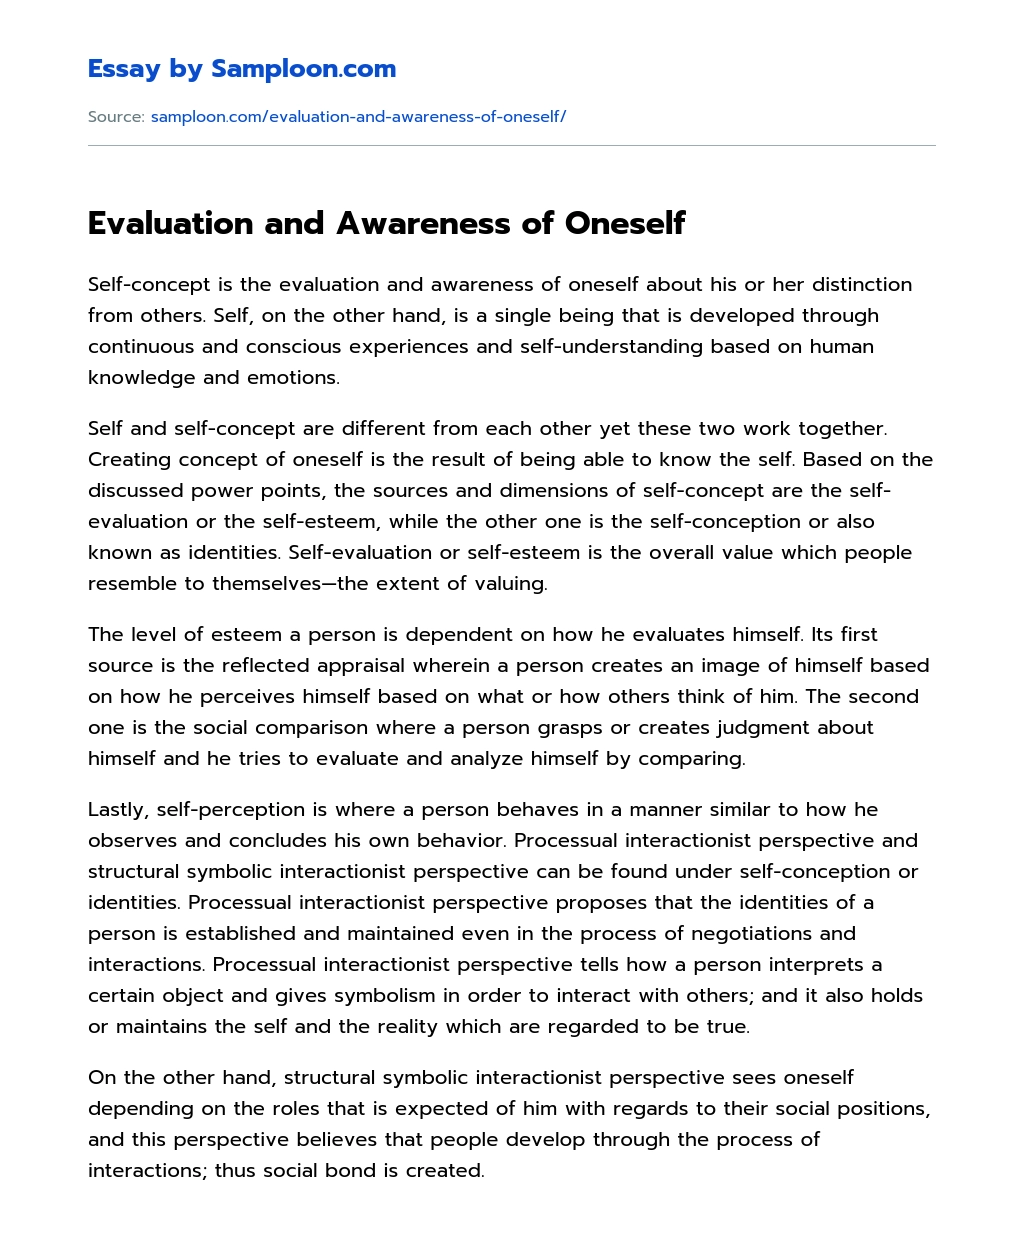 Evaluation and Awareness of Oneself essay